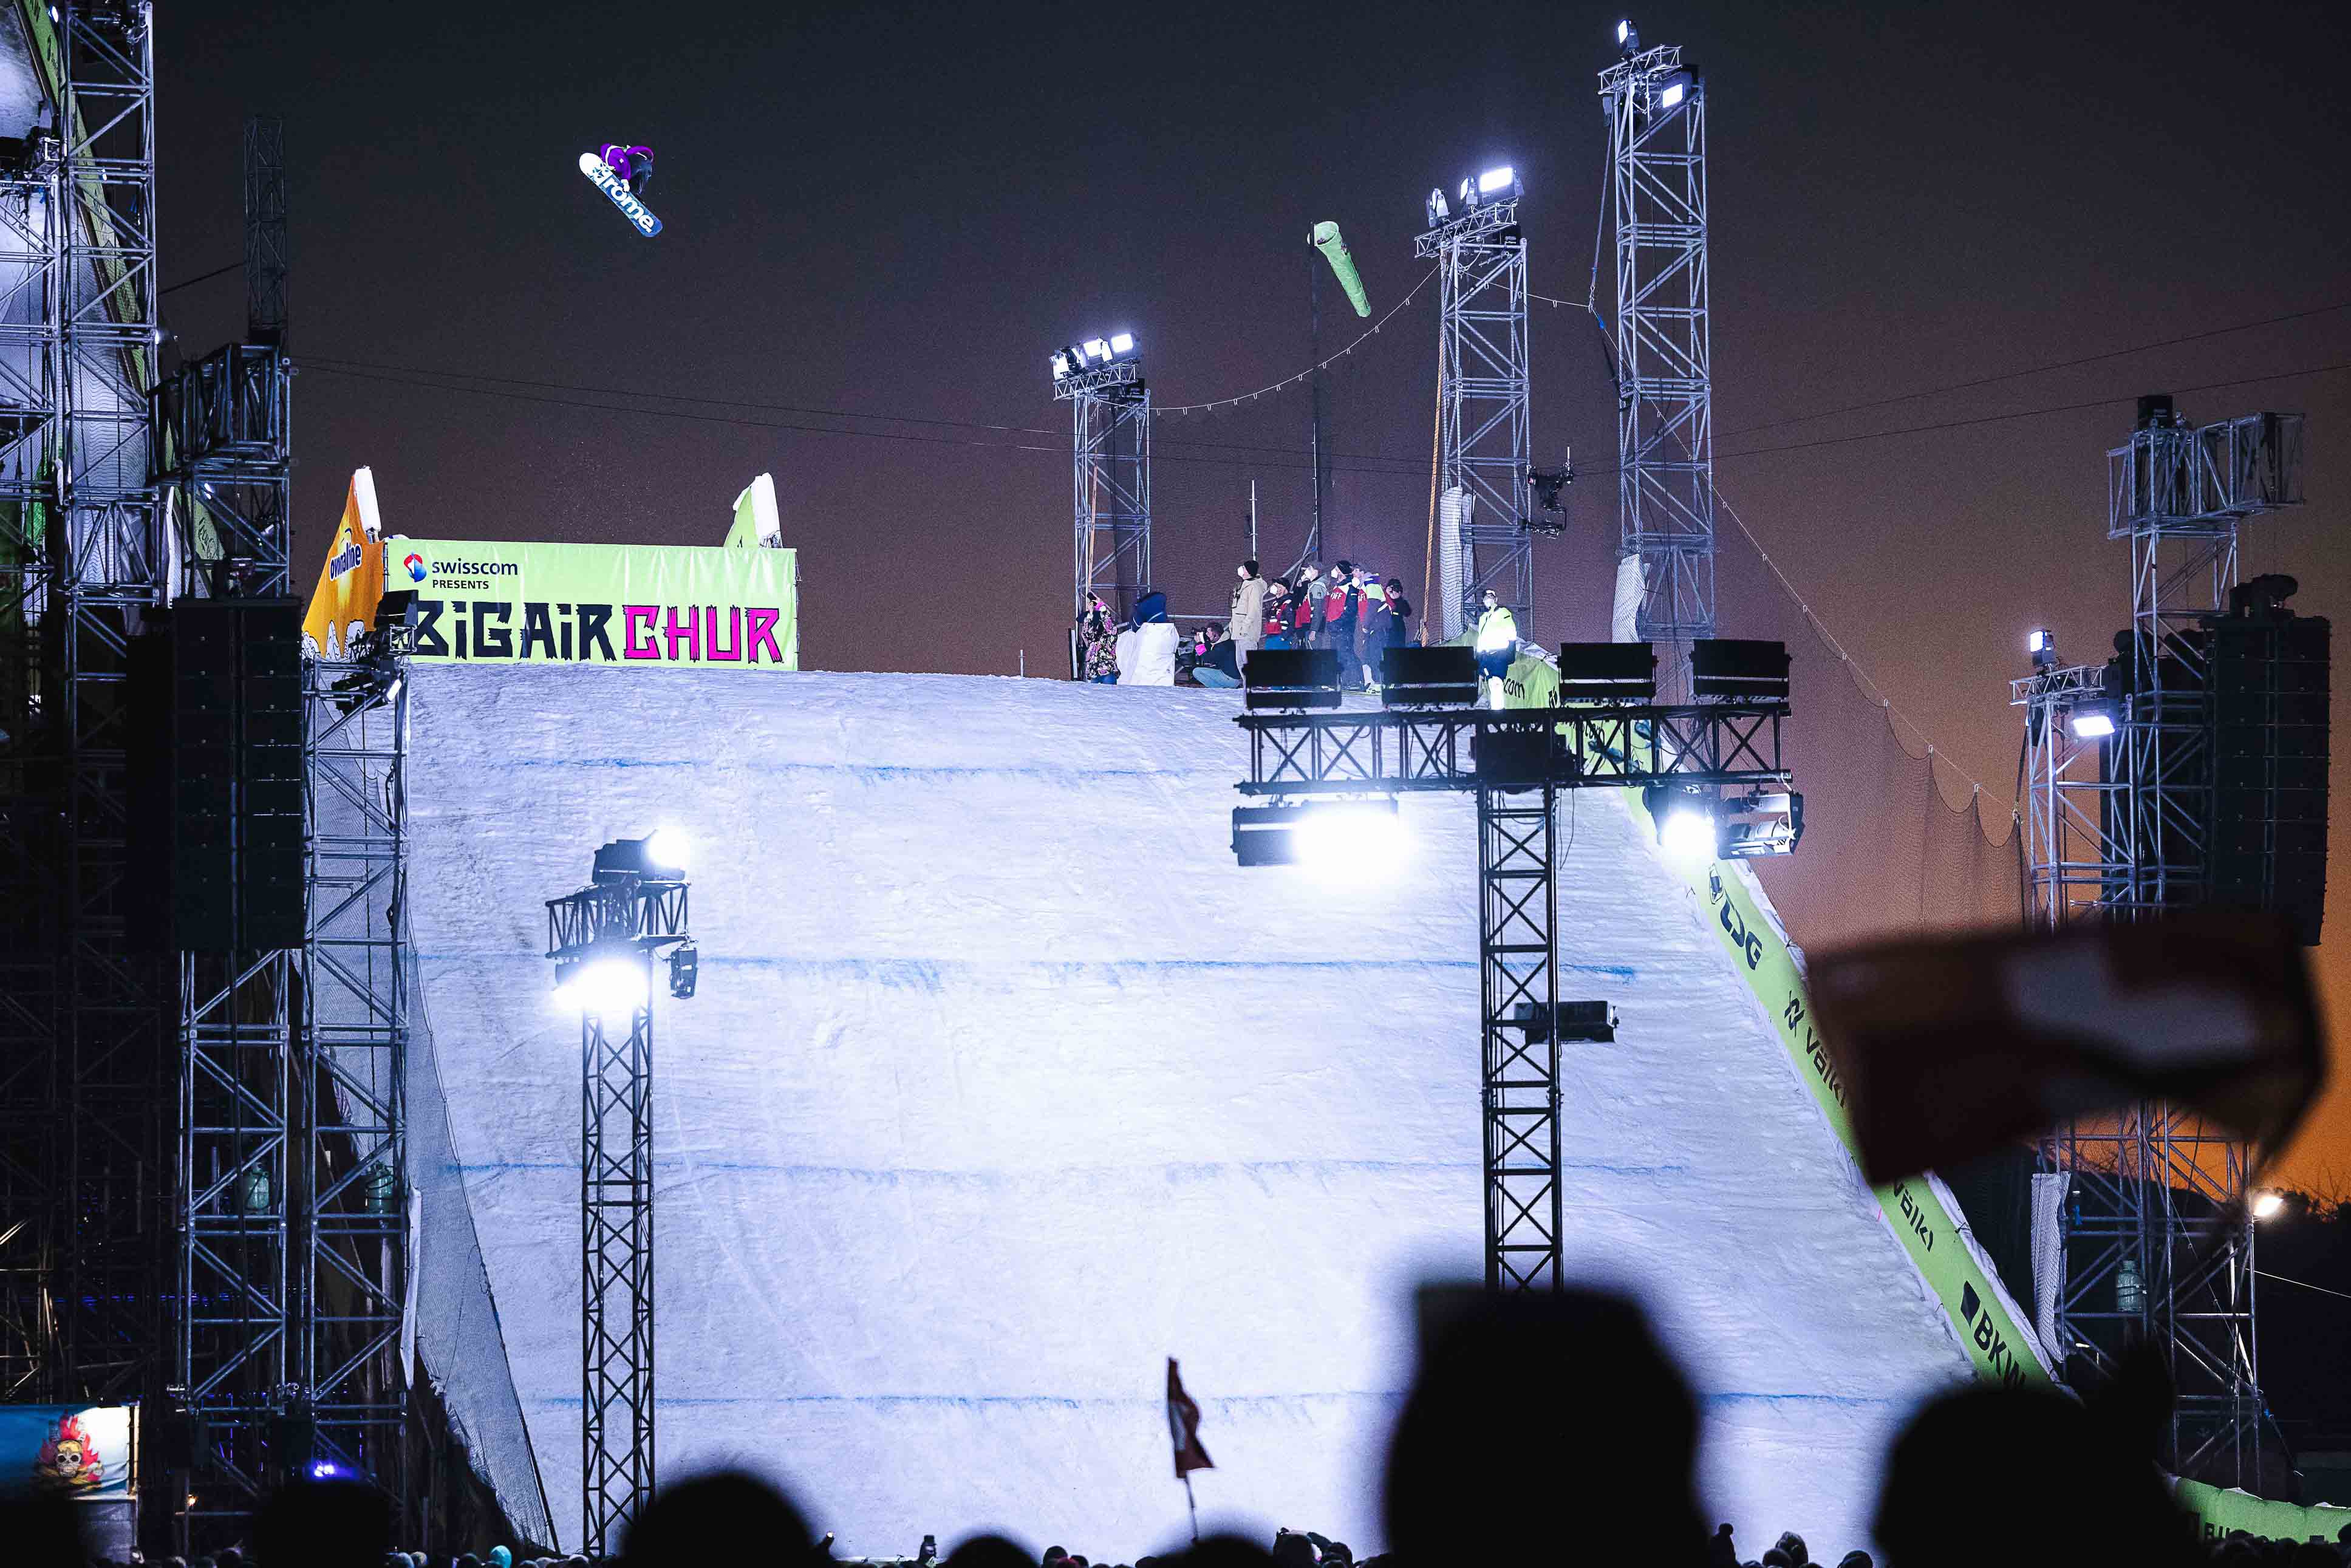 Monster Energy's Rene Rinnekangas Takes 2nd Place in Men’s Snowboard Big Air at FIS Freeski and Snowboard 2021/2022 World Cup Season Opener in Chur